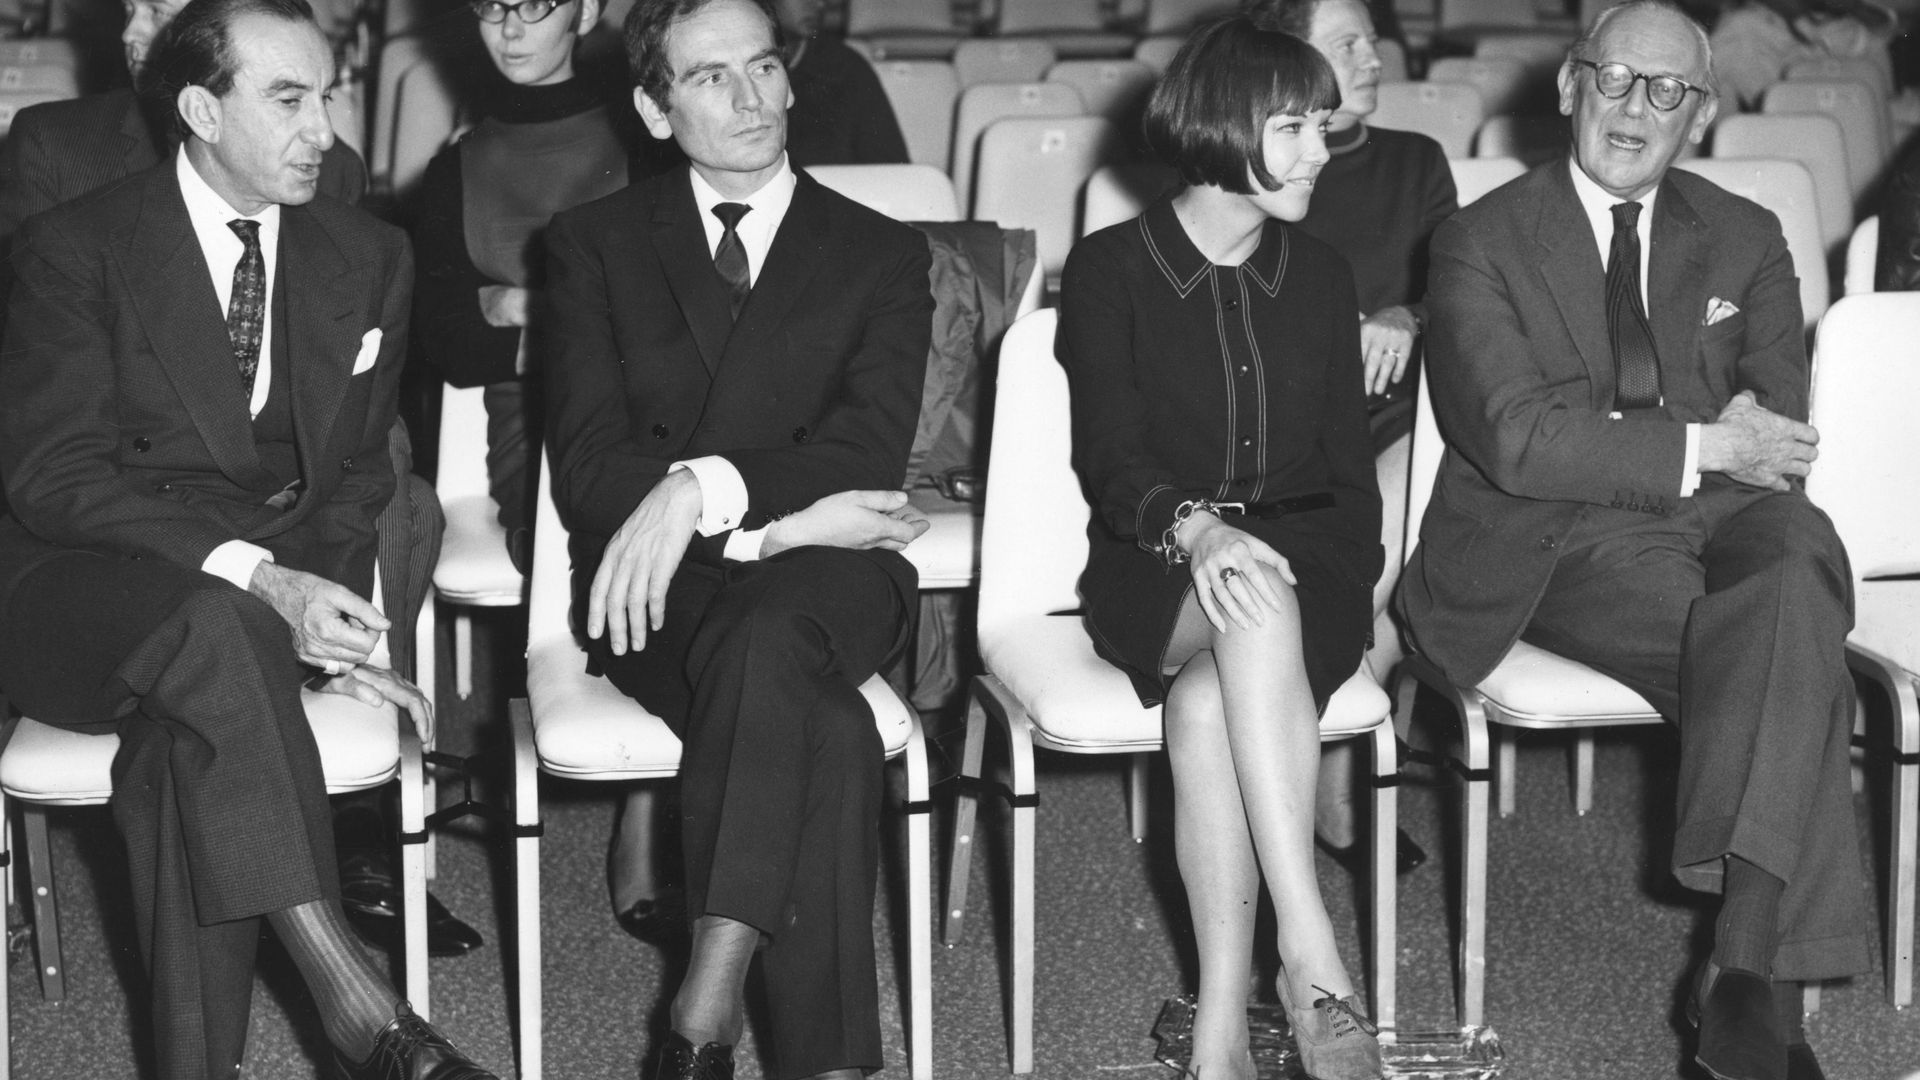 15th October 1963:  At the rehearsal for the first Sunday Times International Fashion Awards show in the Grand Ballroom of London's Hilton Hotel are (from left to right) fashion designers Emilio Pucci, Pierre Cardin, Mary Quant and fashion authority James